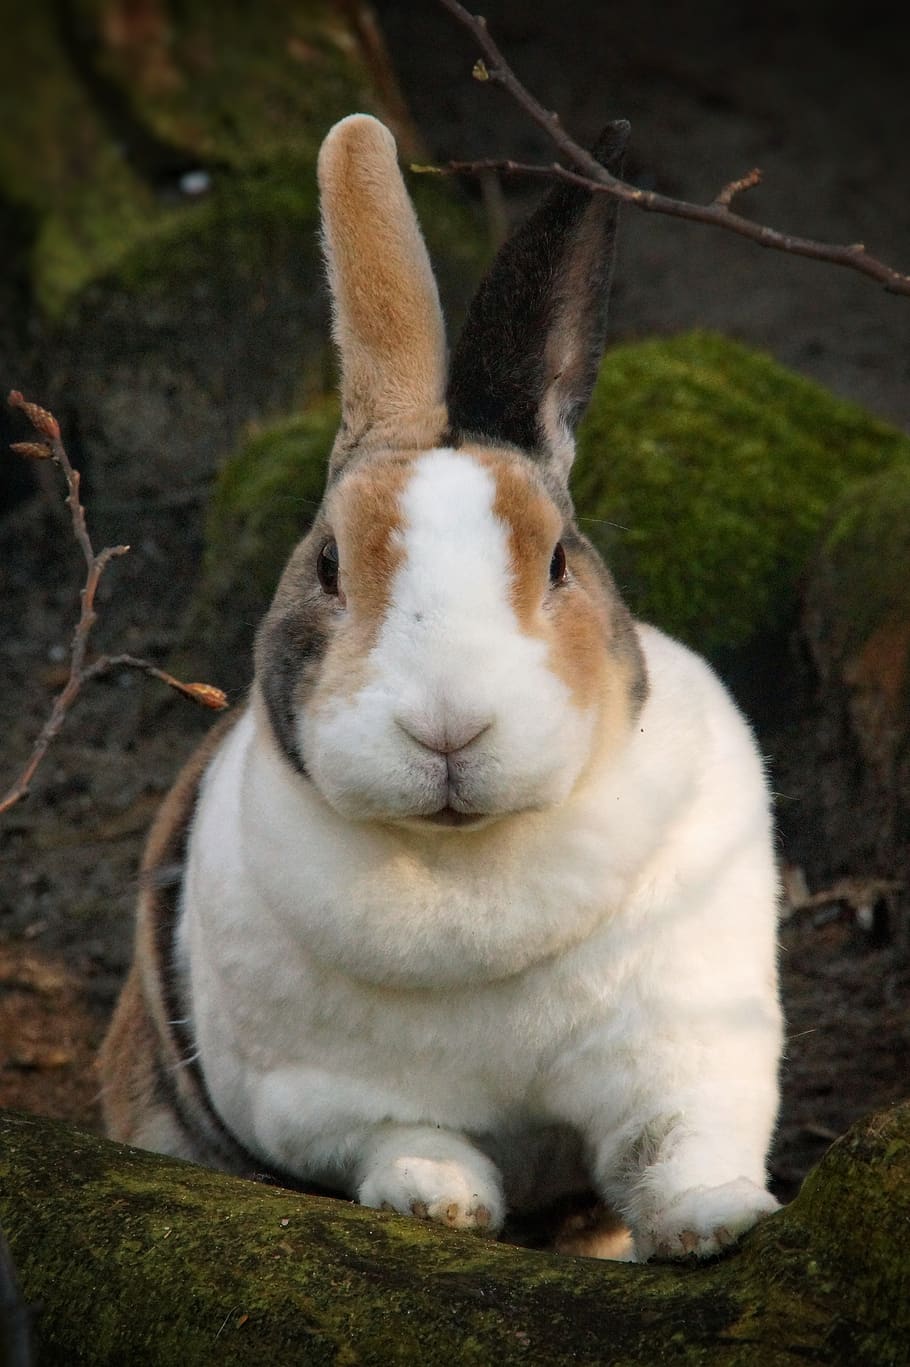 hare, rabbit, pet, spotted, cute, sweet, zoo, cuddly, nature, rabbit ears